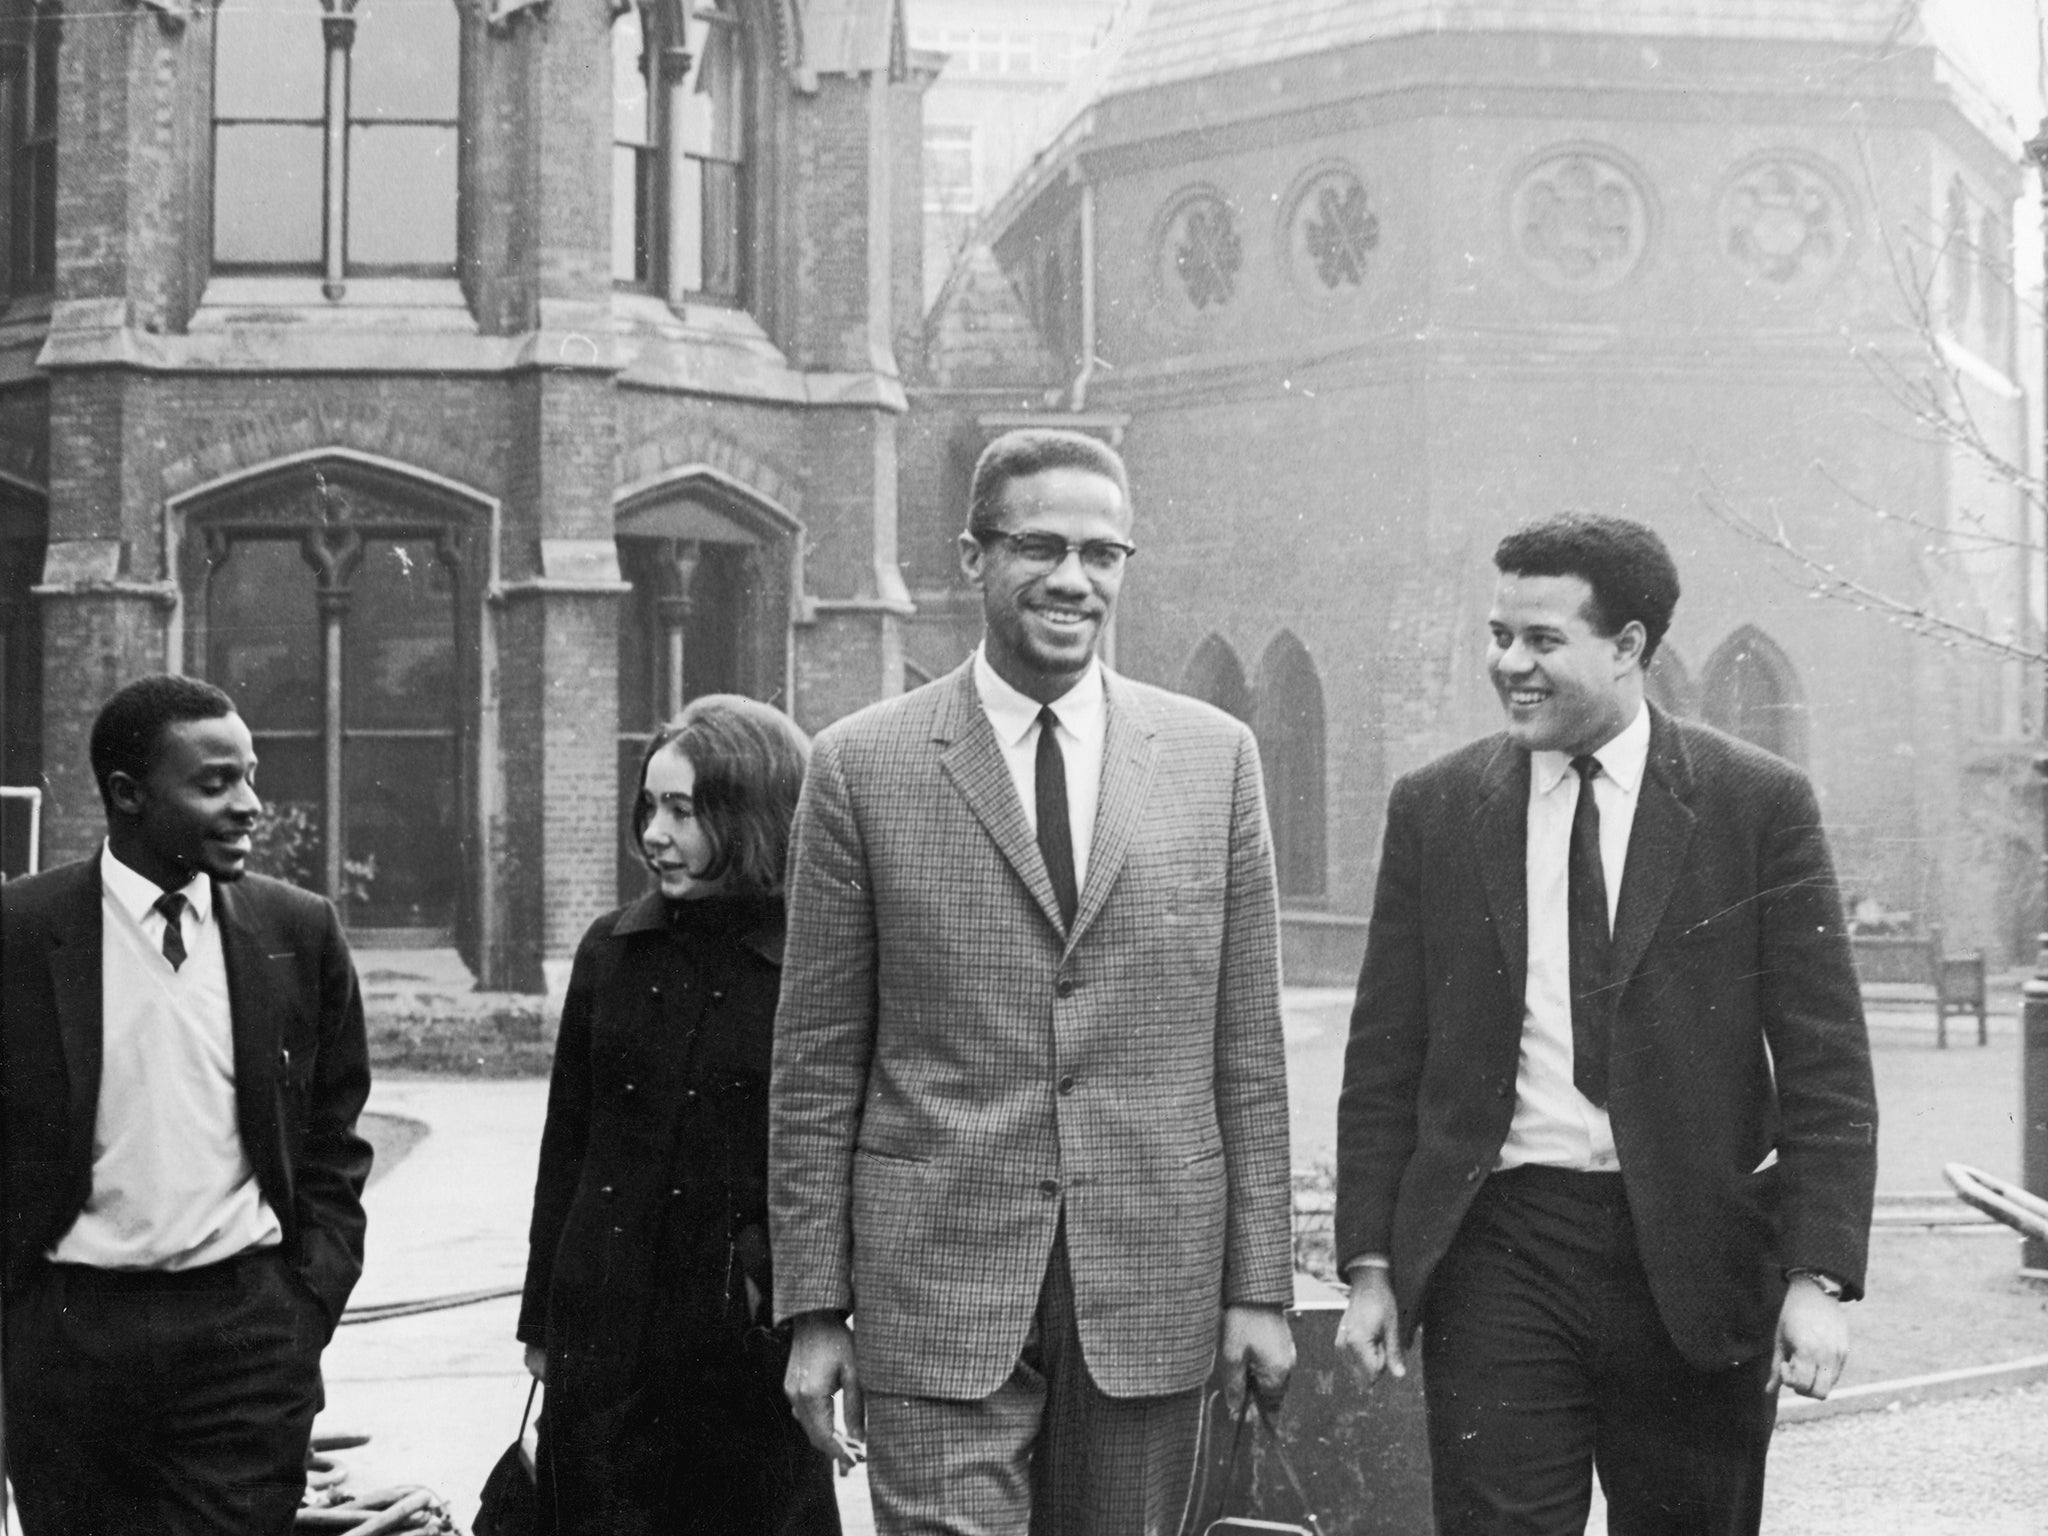 After over five decades, new evidence surfaced on killing of Malcolm X, as family demands to reopen the case